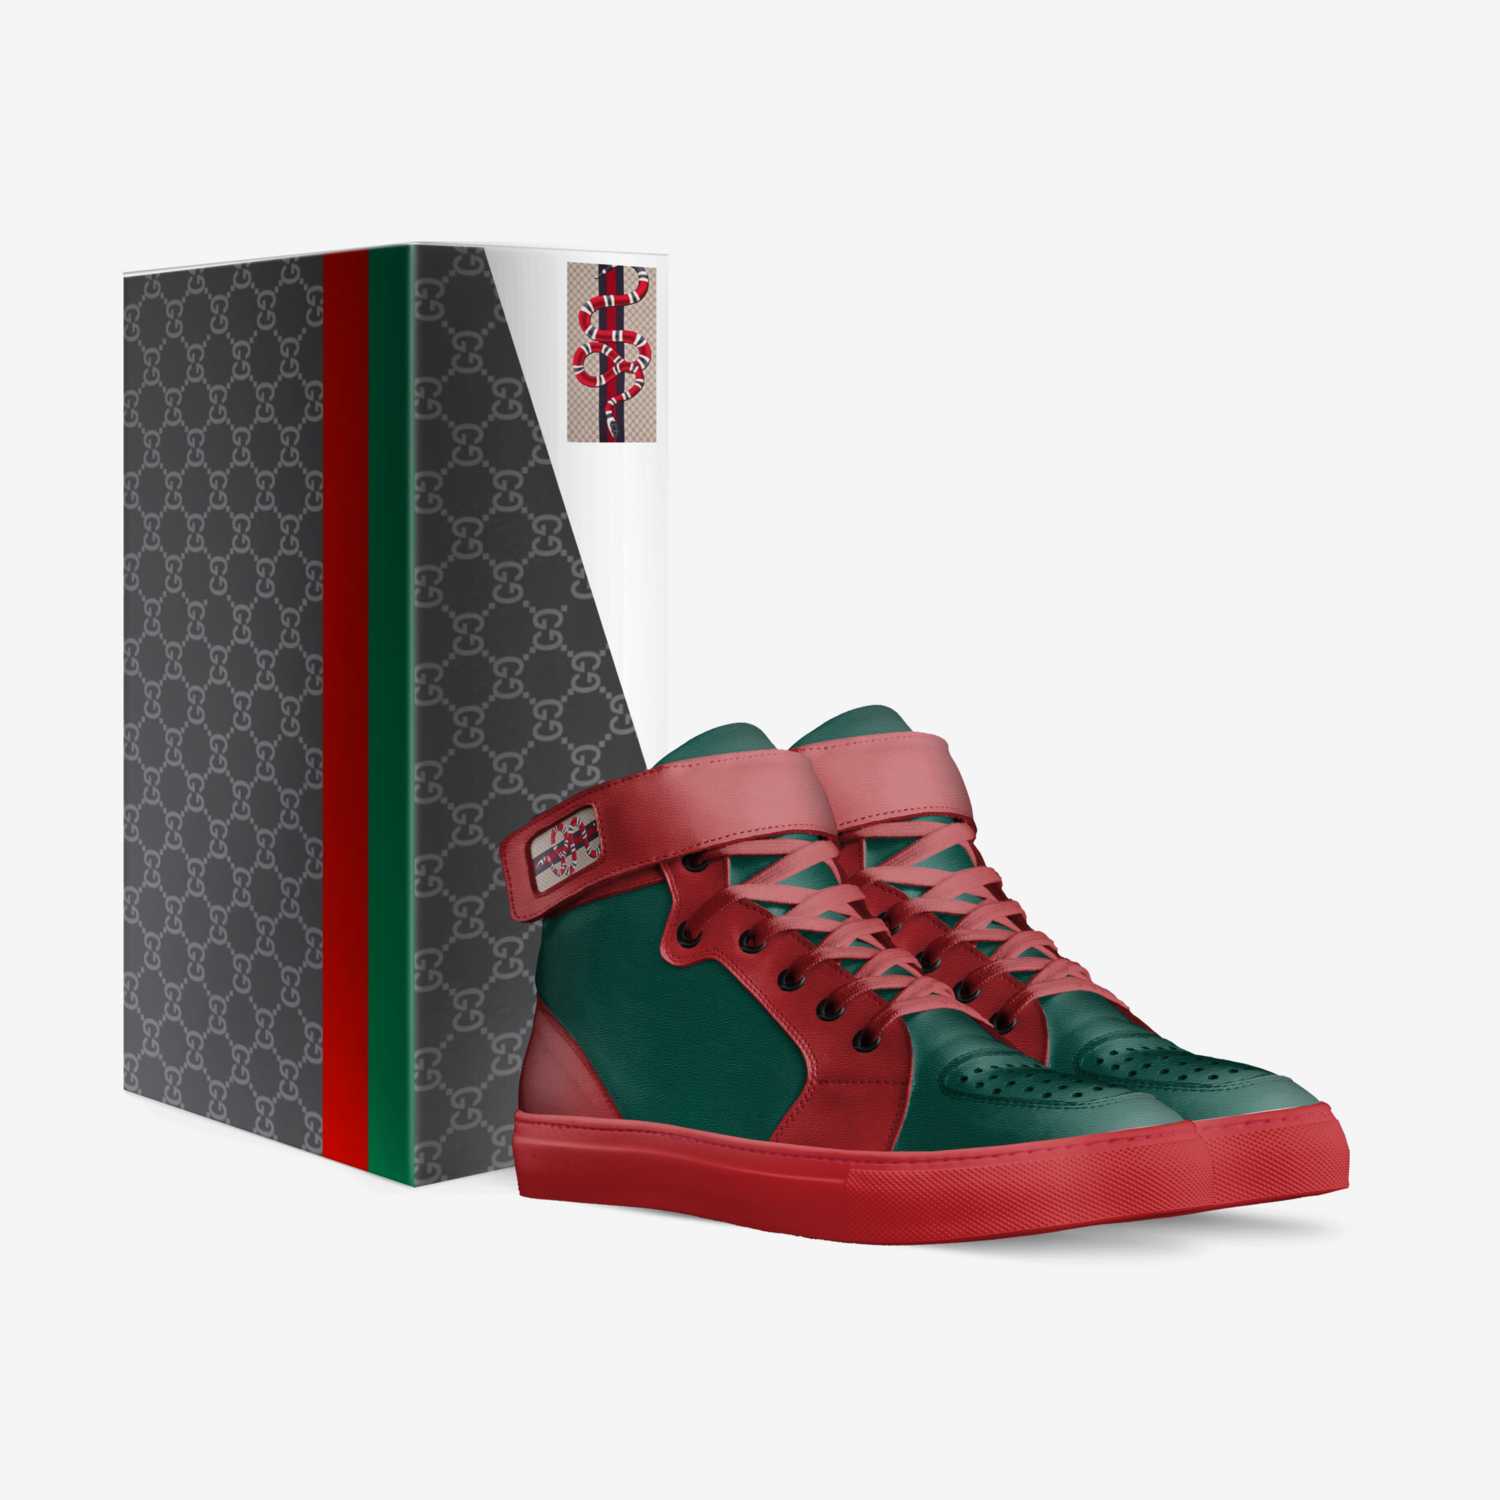 Snakes custom made in Italy shoes by Nicolas Giannini | Box view